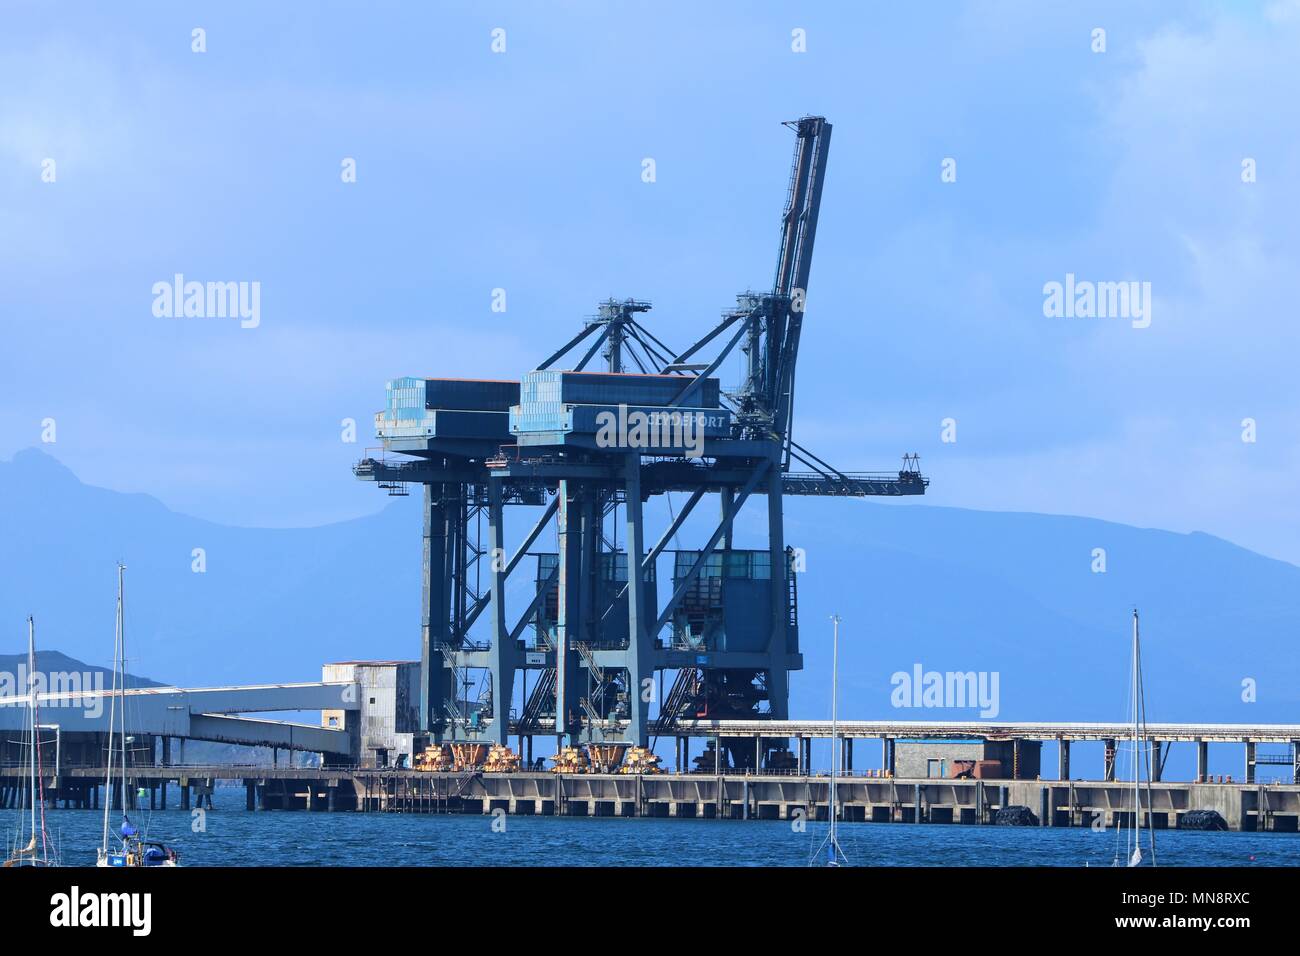 Cranes / ship loaders for unloading coal for Hunterston A Power Station at Clydeport Terminal, Largs, North Ayrshire, Scotland, UK Stock Photo